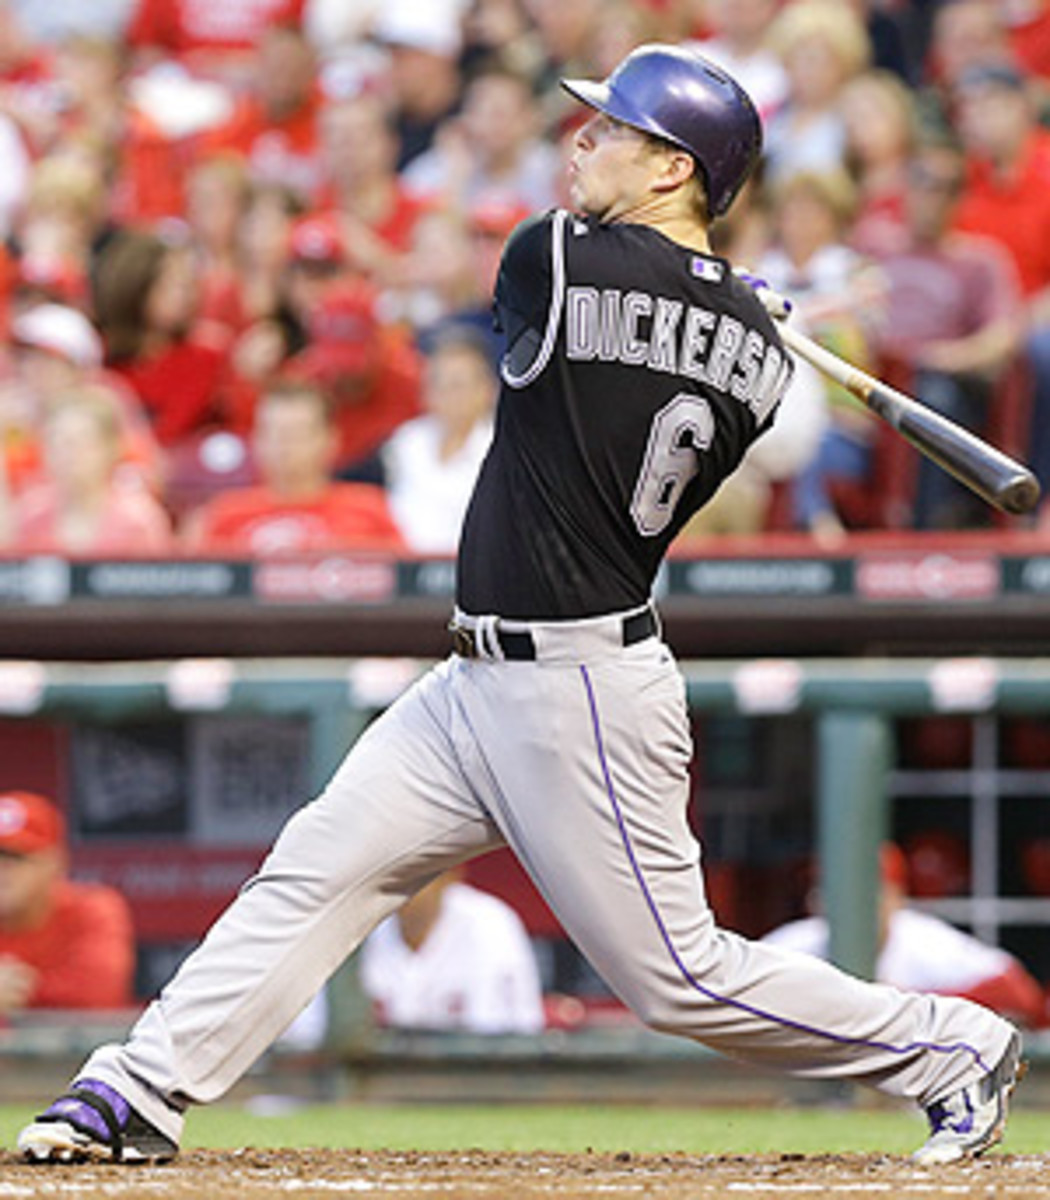 Corey Dickerson earned a second-straight start in the Colorado outfield on Sunday.